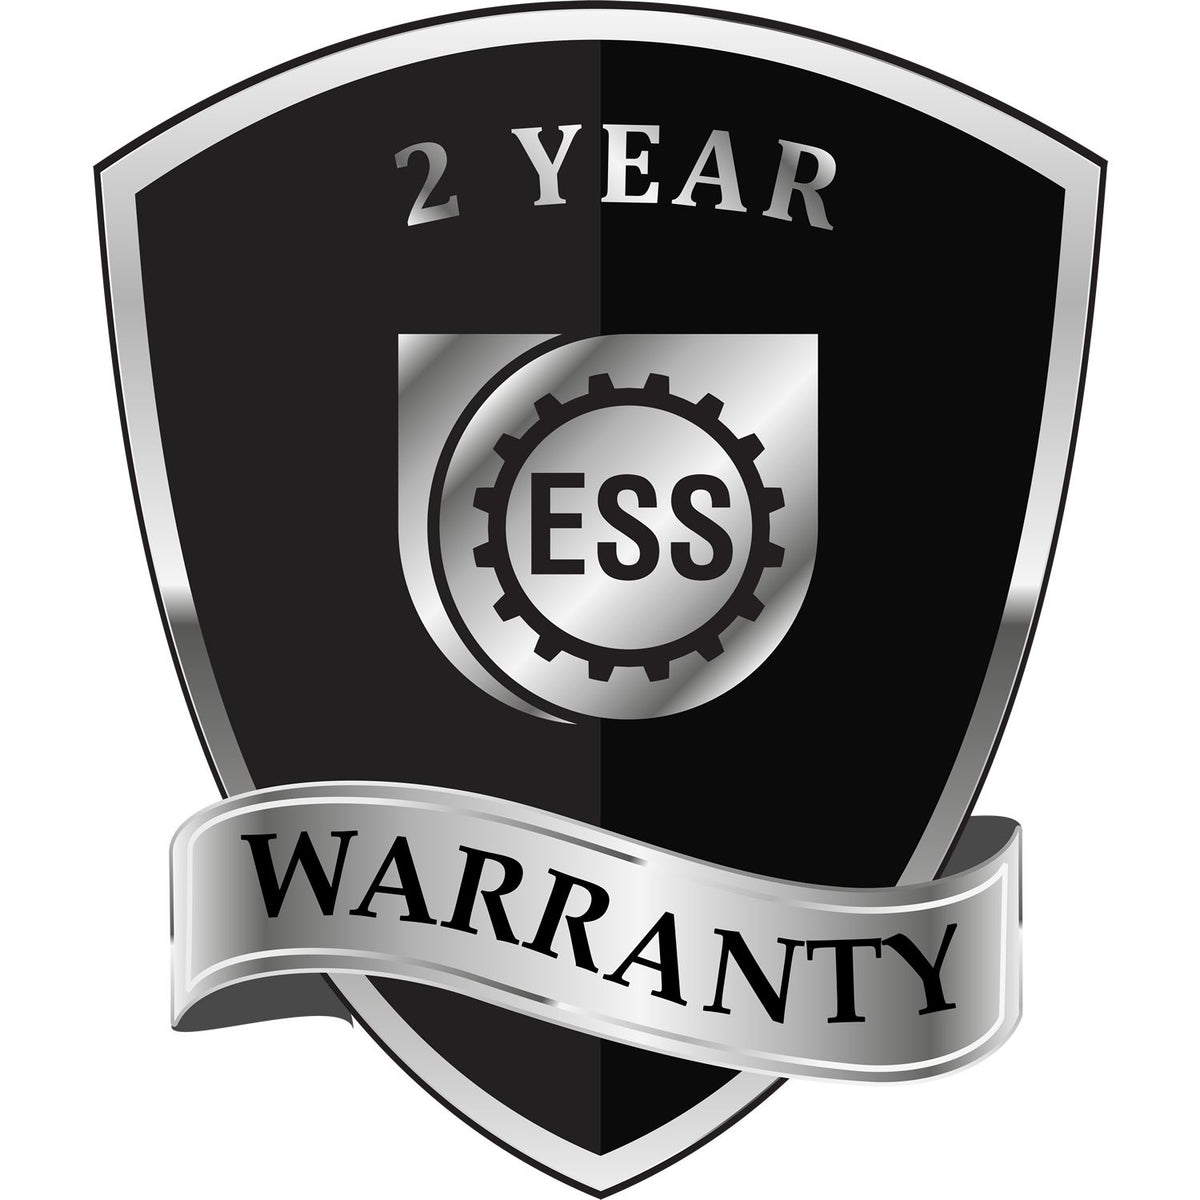 A black and silver badge or emblem showing warranty information for the Hybrid Oklahoma Engineer Seal